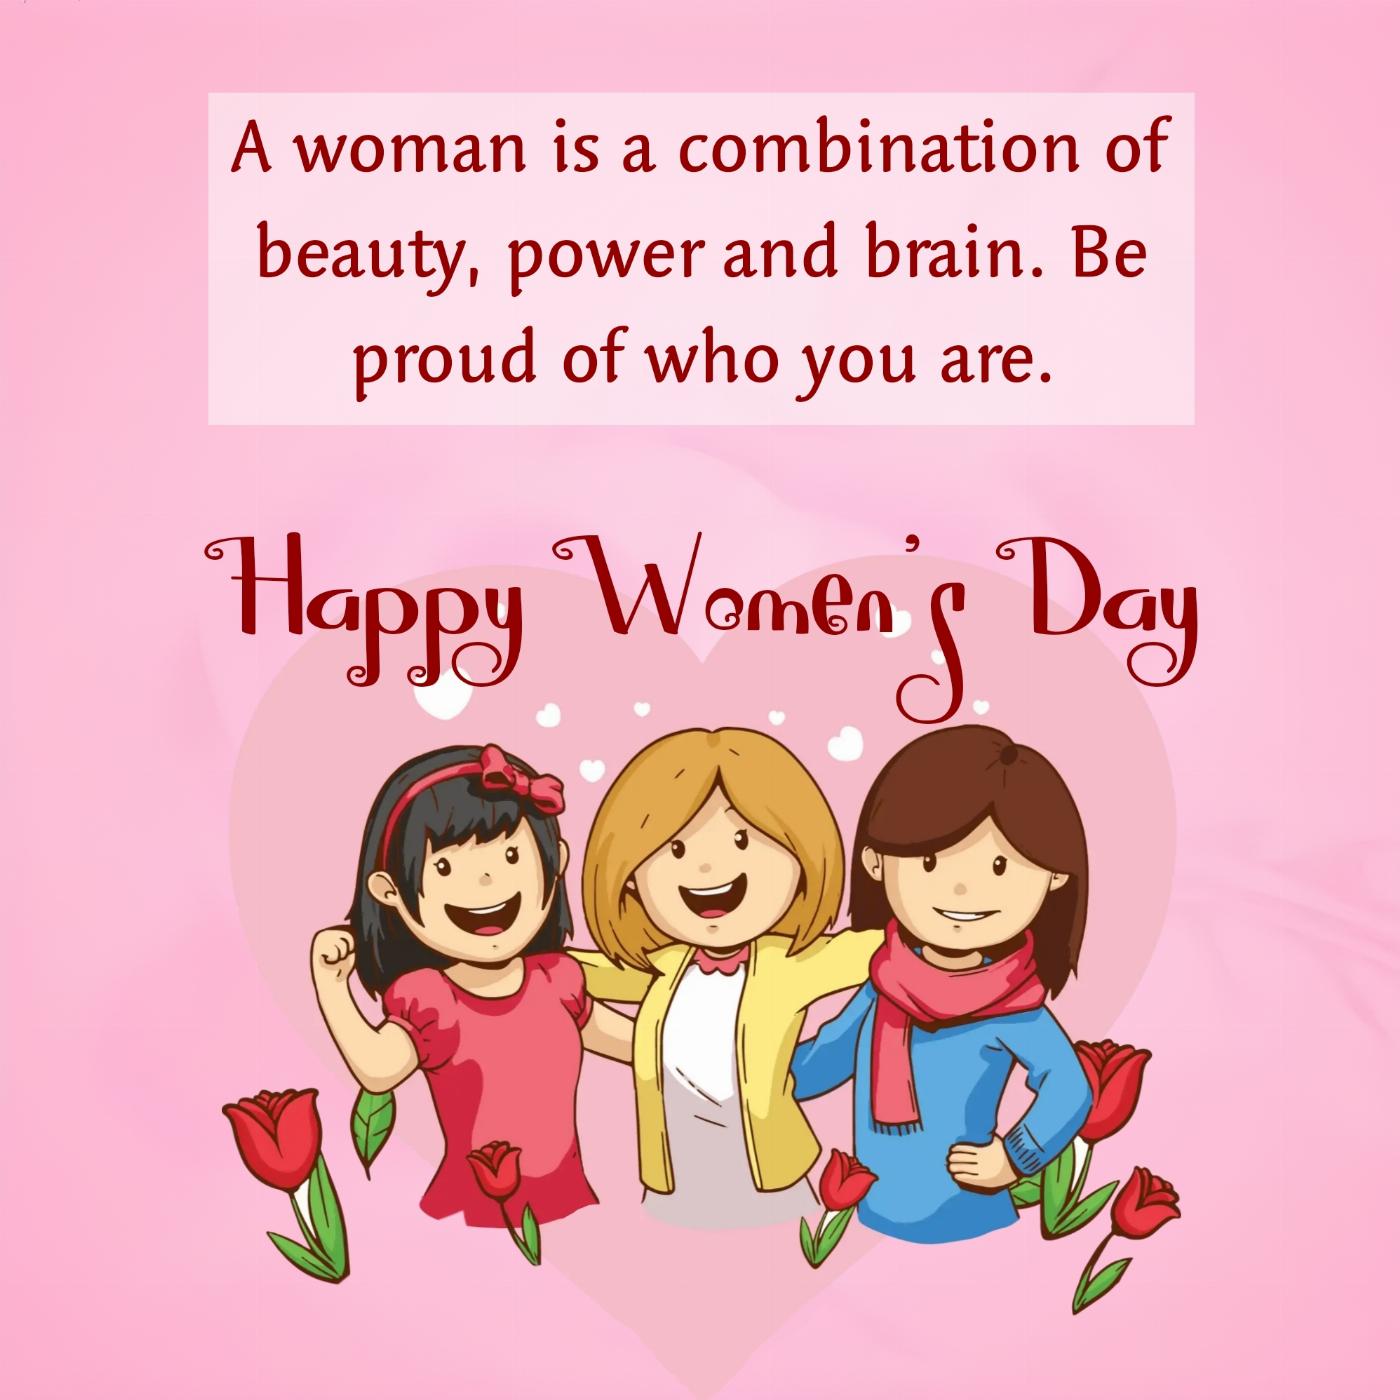 A woman is a combination of beauty power and brain